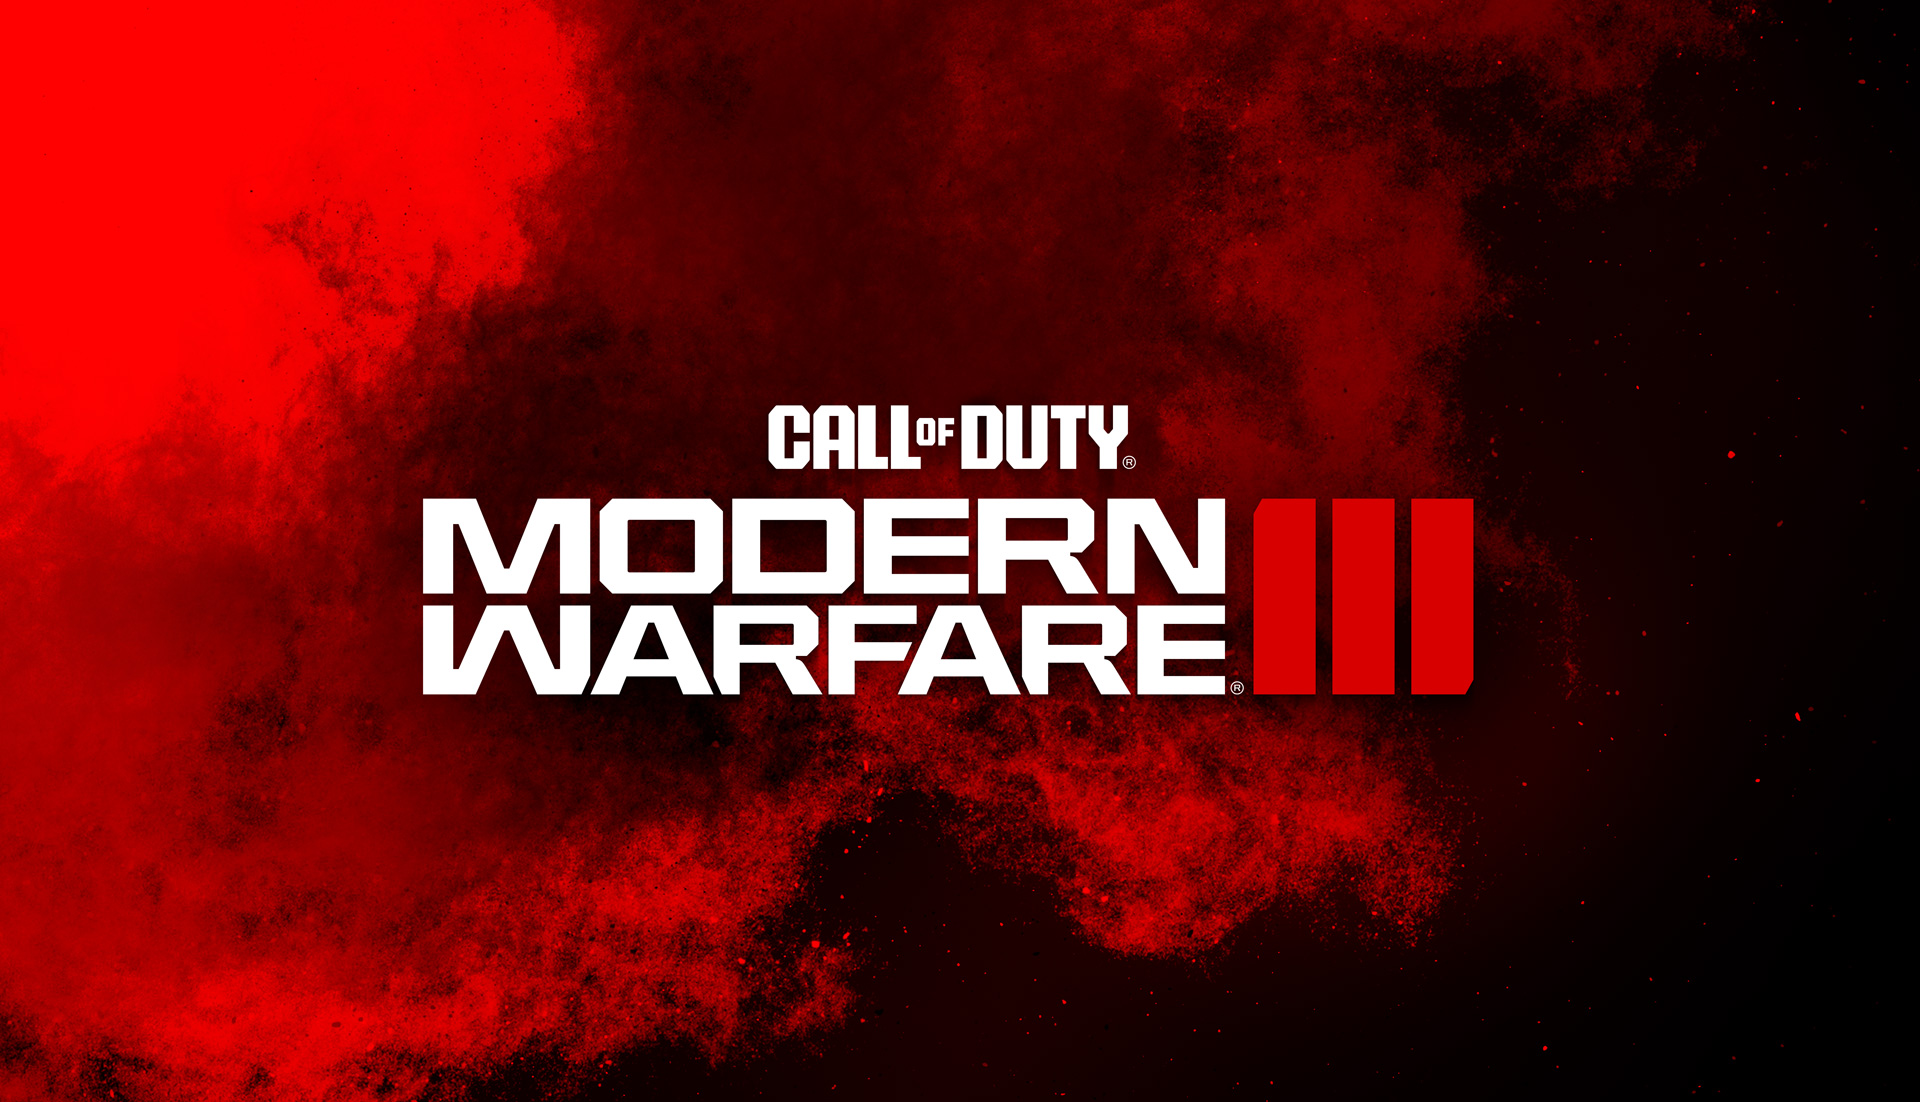 The official logo for Call of Duty: Modern Warfare III.